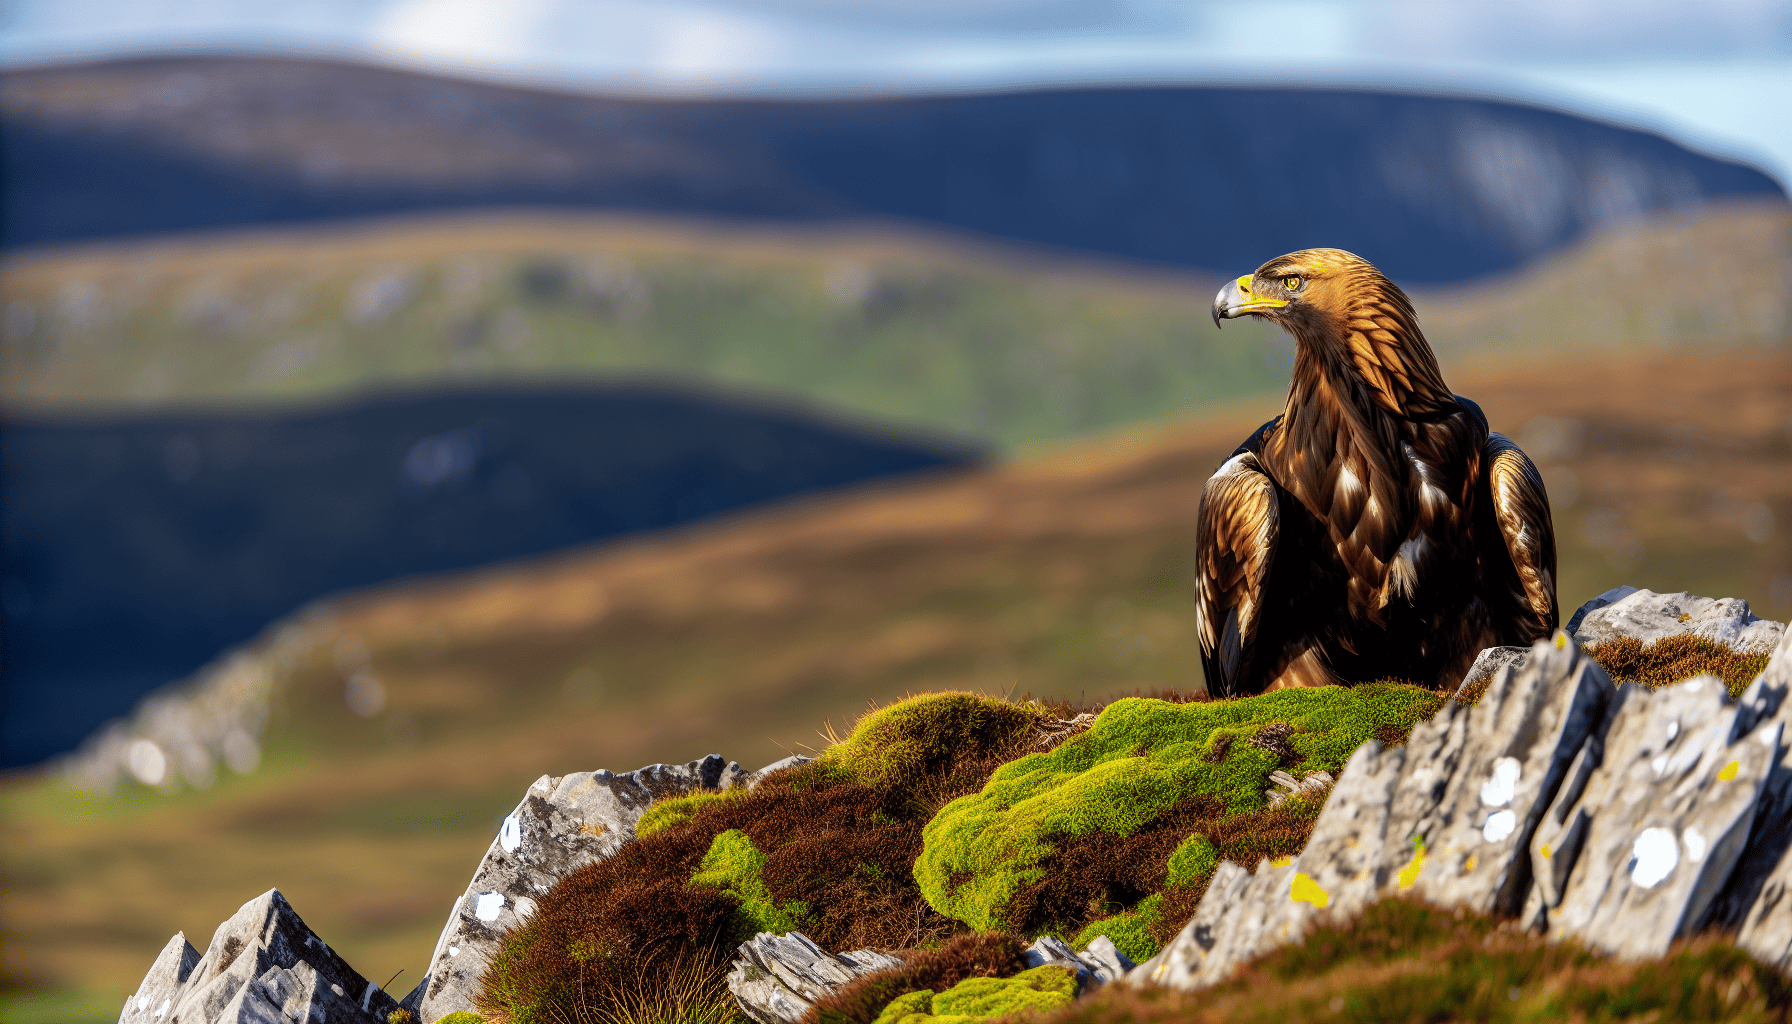 Majestic golden eagle perched on a rugged cliff in Ireland